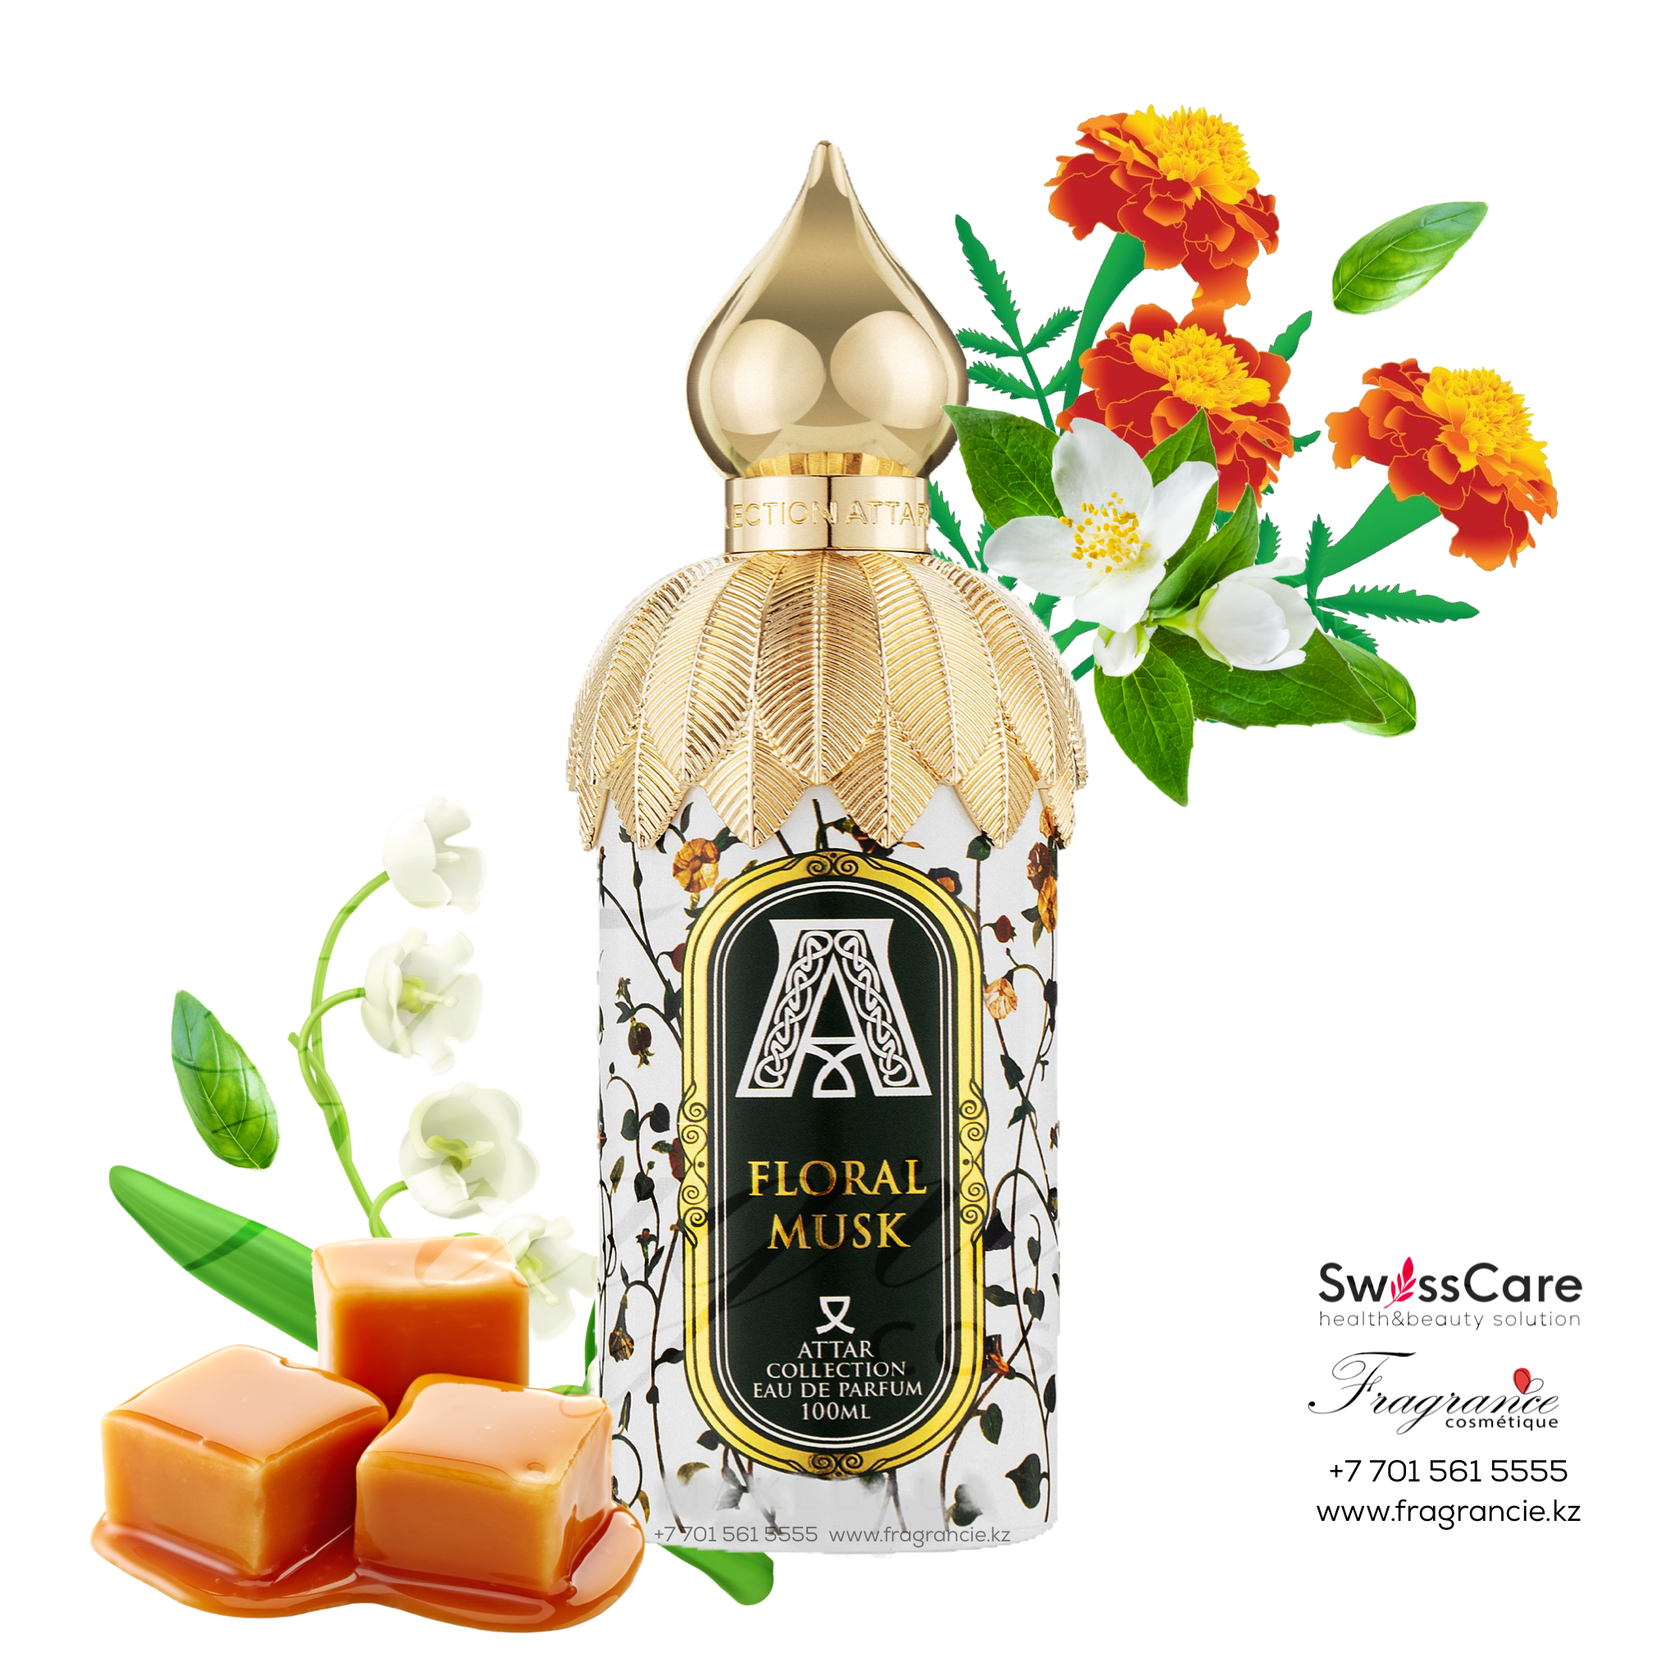 Attar collection Floral Musk, 100 ml. Attar collection Floral Musk EDP 100ml. Attar collection Floral Musk EDP. Attar collection al Rayhan 30 мл. Attar collection floral